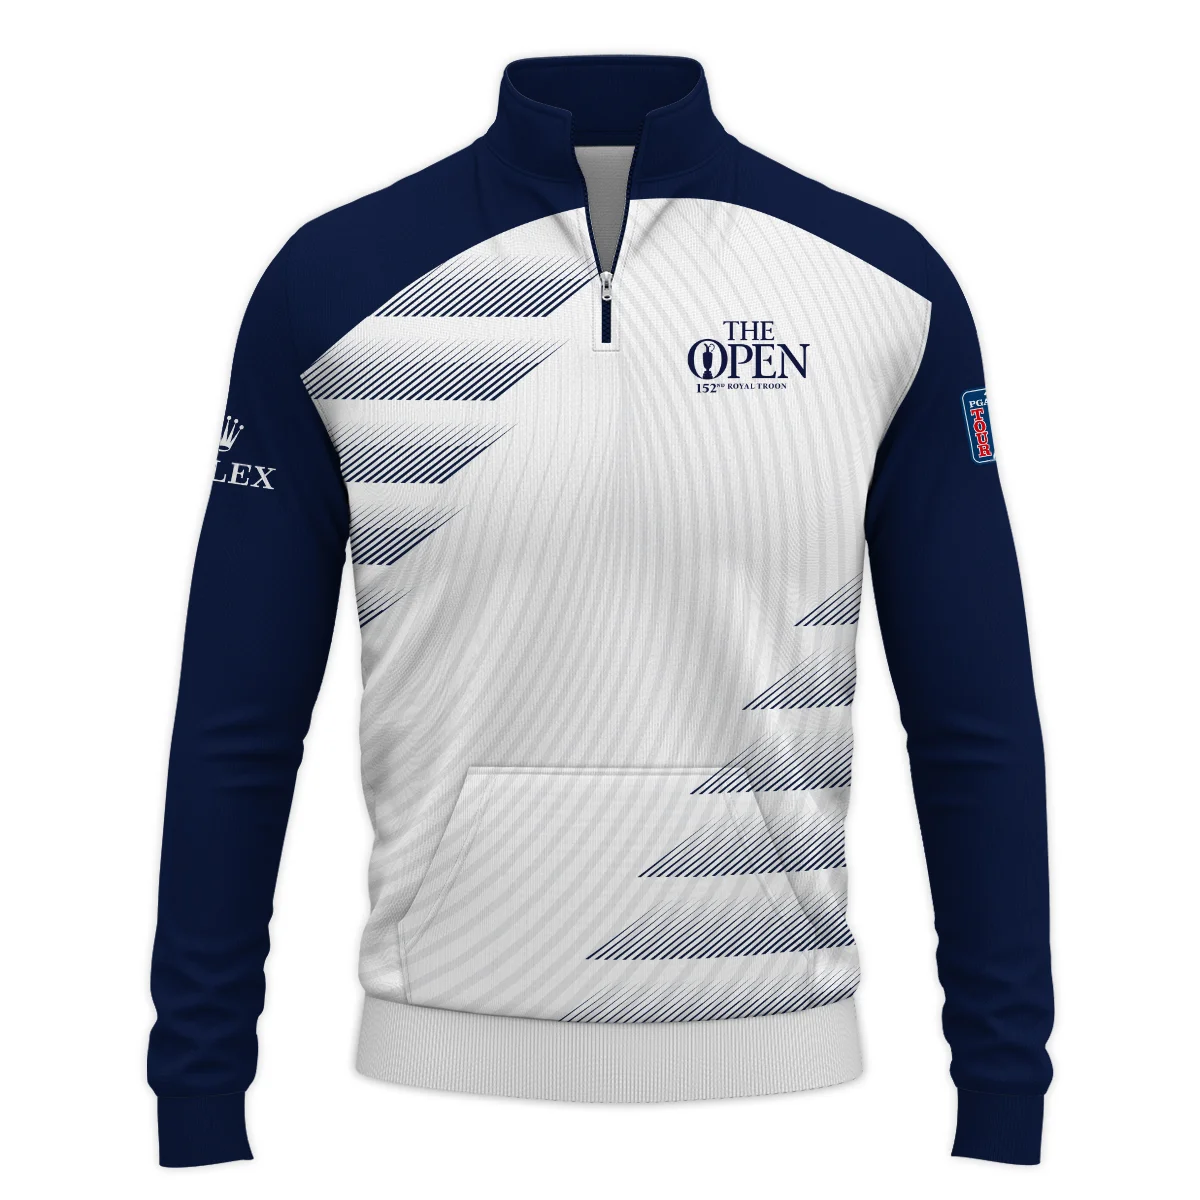 Rolex 152nd Open Championship Blue White Line Pattern Performance Quarter Zip Sweatshirt With Pockets All Over Prints HOTOP280624A02ROXTS